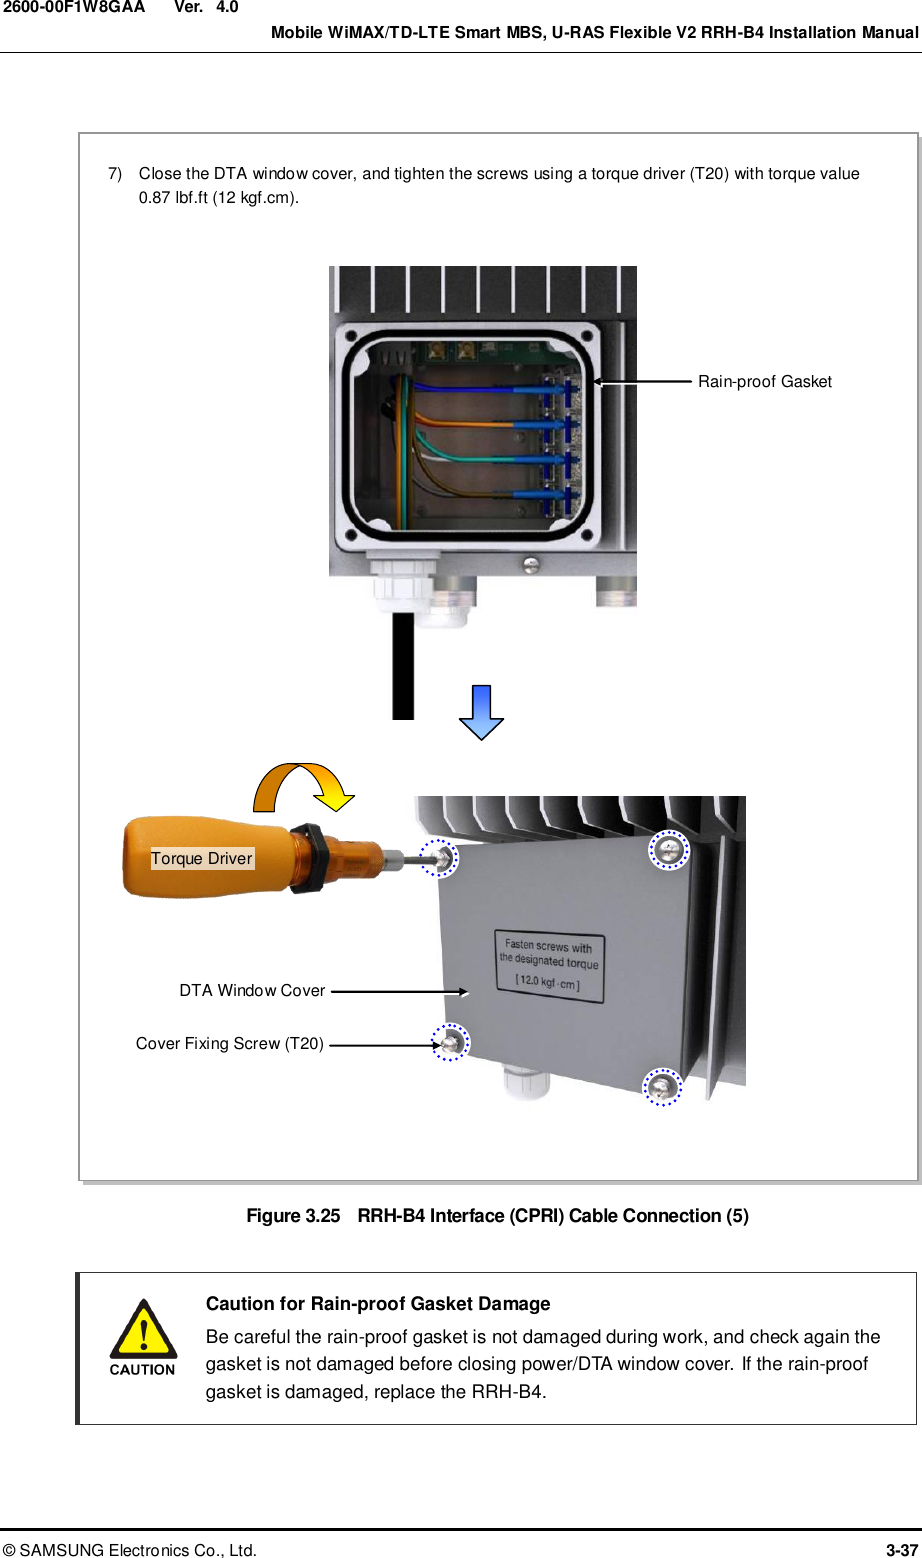  Ver.    Mobile WiMAX/TD-LTE Smart MBS, U-RAS Flexible V2 RRH-B4 Installation Manual ©  SAMSUNG Electronics Co., Ltd.  3-37 2600-00F1W8GAA 4.0  Figure 3.25  RRH-B4 Interface (CPRI) Cable Connection (5)    Caution for Rain-proof Gasket Damage   Be careful the rain-proof gasket is not damaged during work, and check again the gasket is not damaged before closing power/DTA window cover. If the rain-proof gasket is damaged, replace the RRH-B4.  DTA Window Cover Cover Fixing Screw (T20) 7)    Close the DTA window cover, and tighten the screws using a torque driver (T20) with torque value   0.87 lbf.ft (12 kgf.cm).  Rain-proof Gasket Torque Driver 